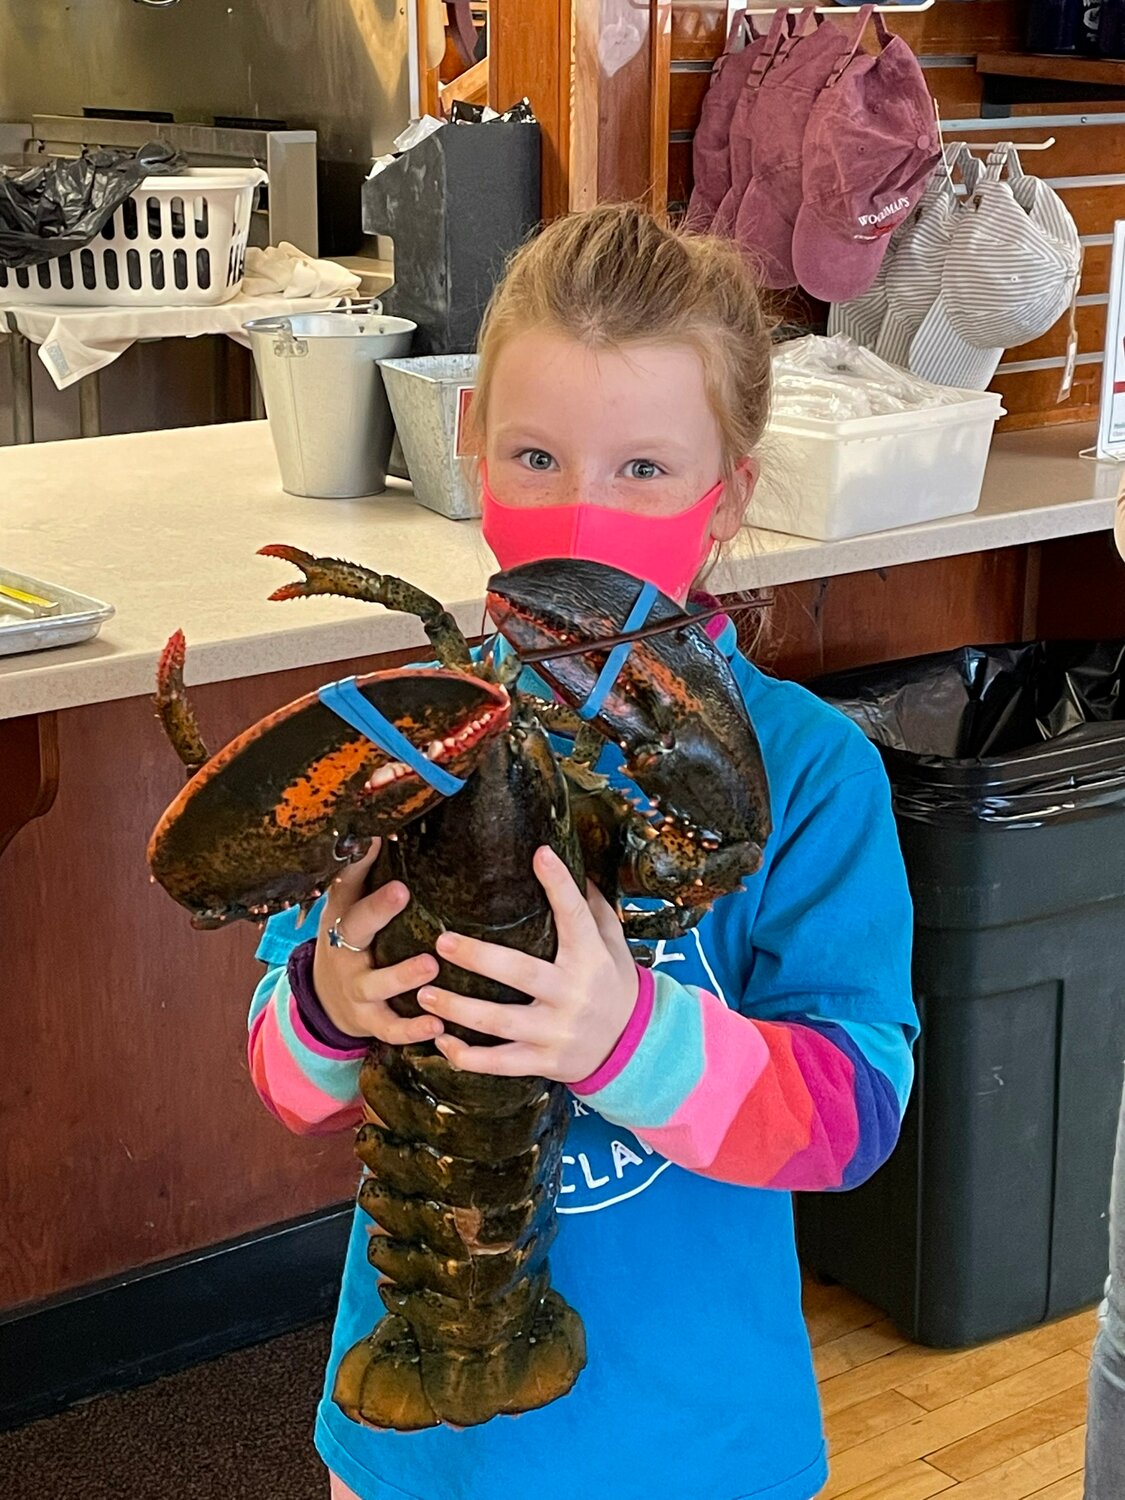 EES second grader with a "good sized" lobster